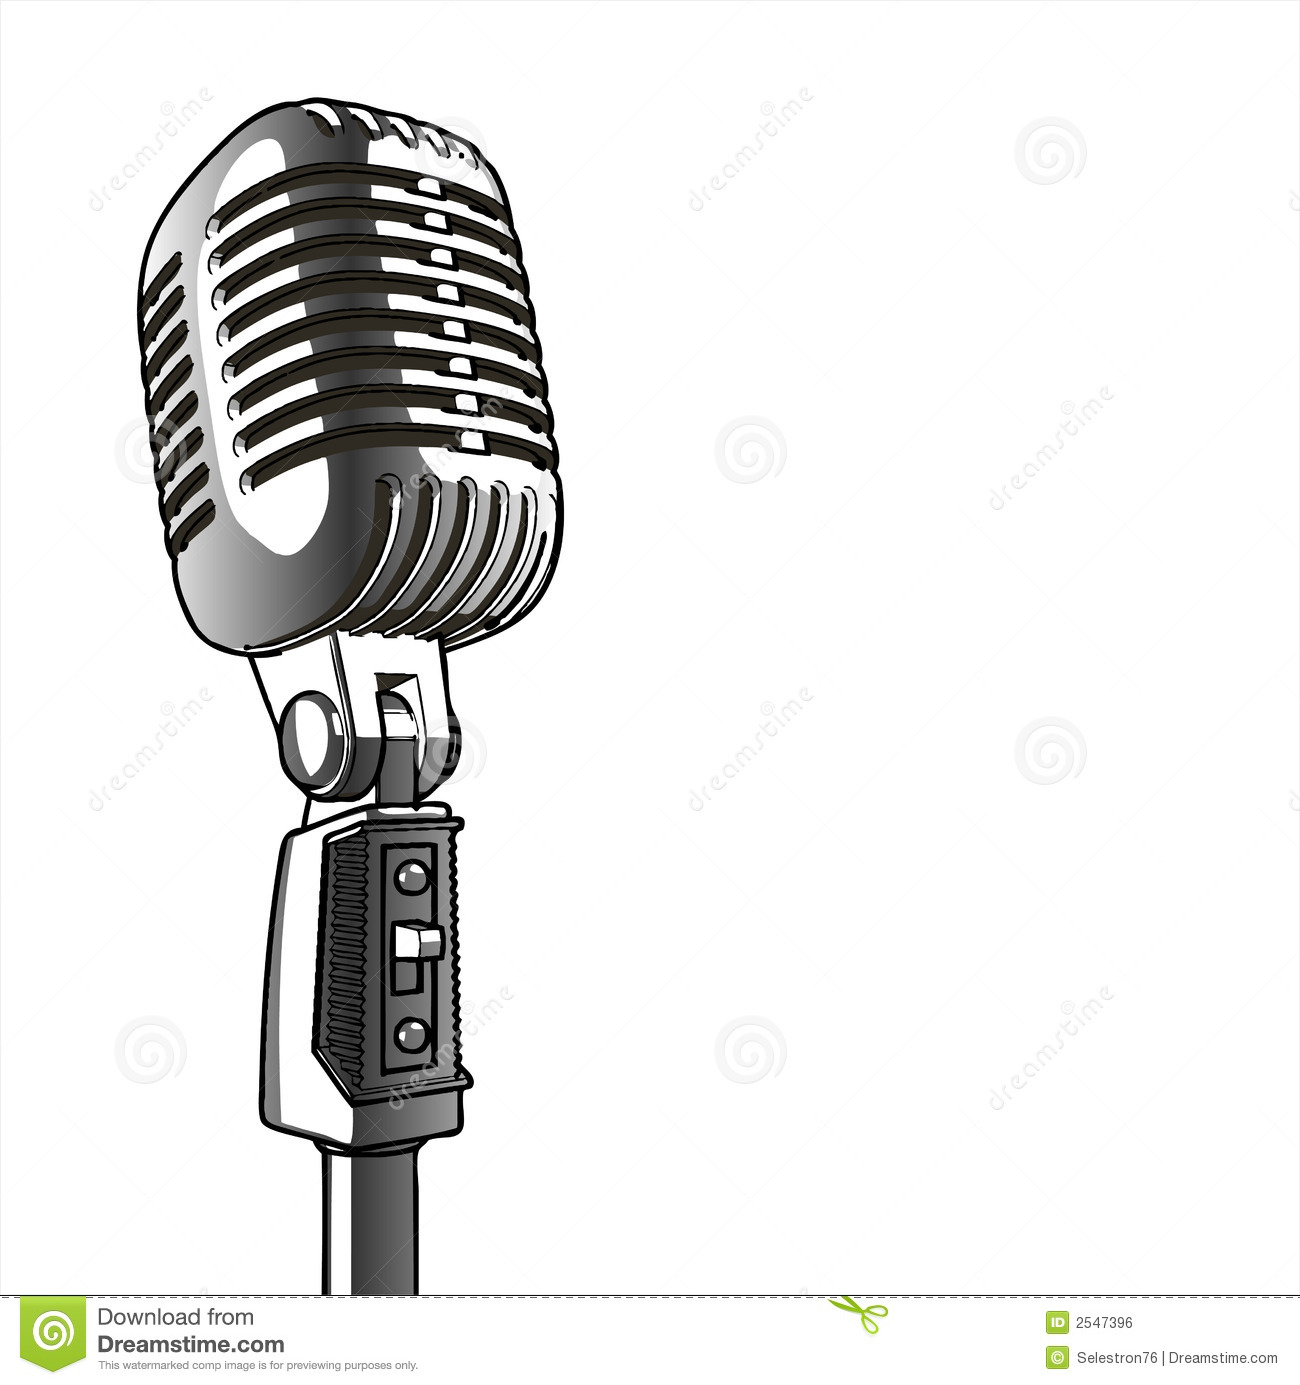 Vintage Microphone   Vector Royalty Free Stock Image   Image  2547396